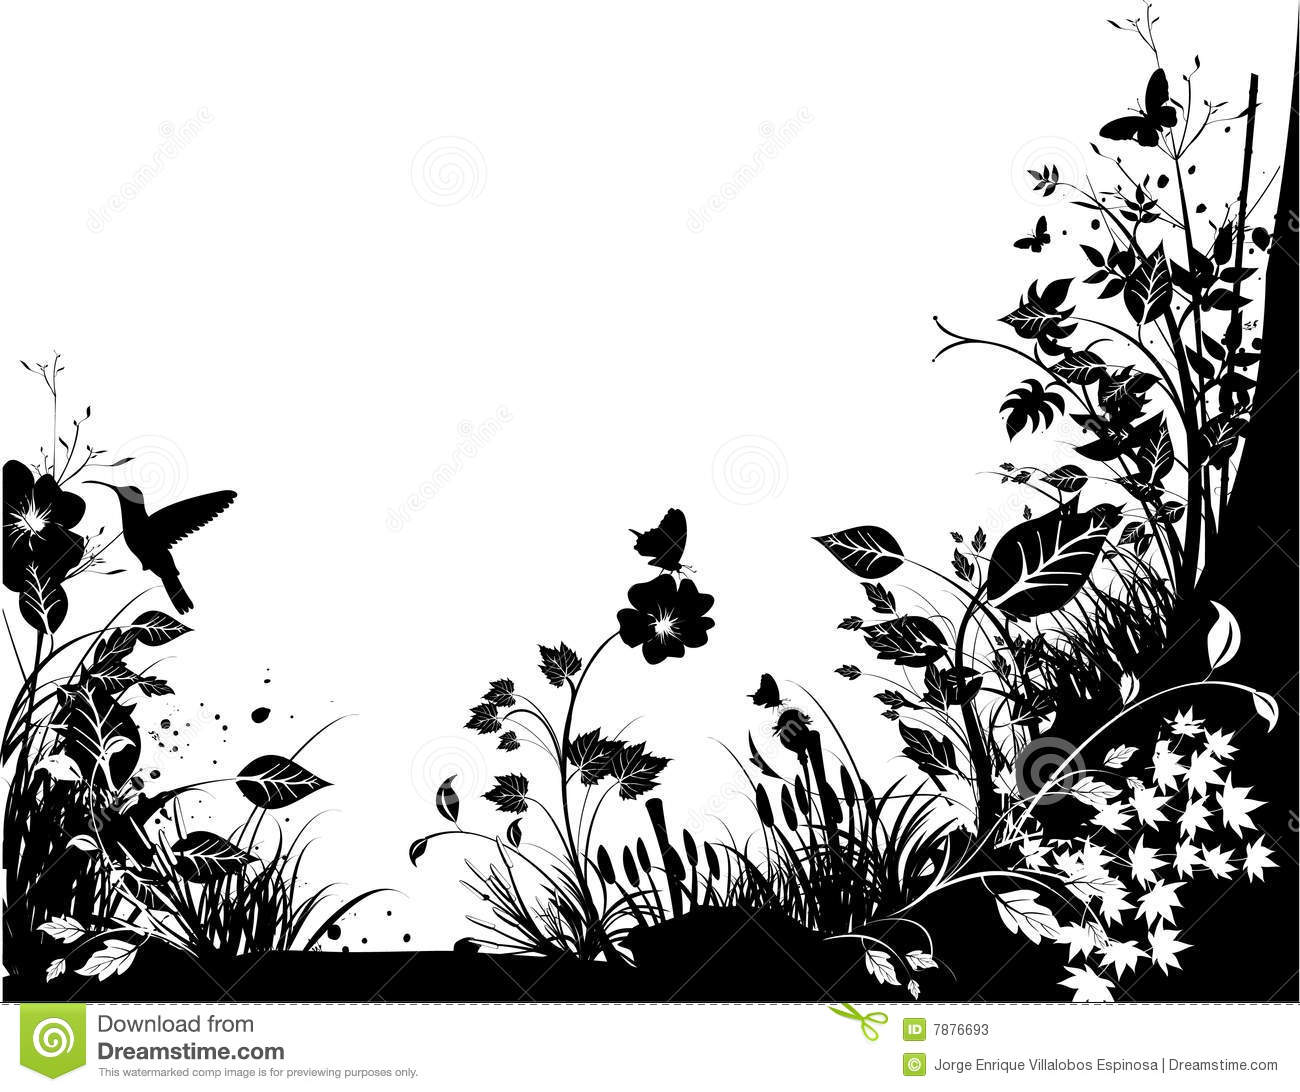 Black And White Nature Illustration Over A White Background